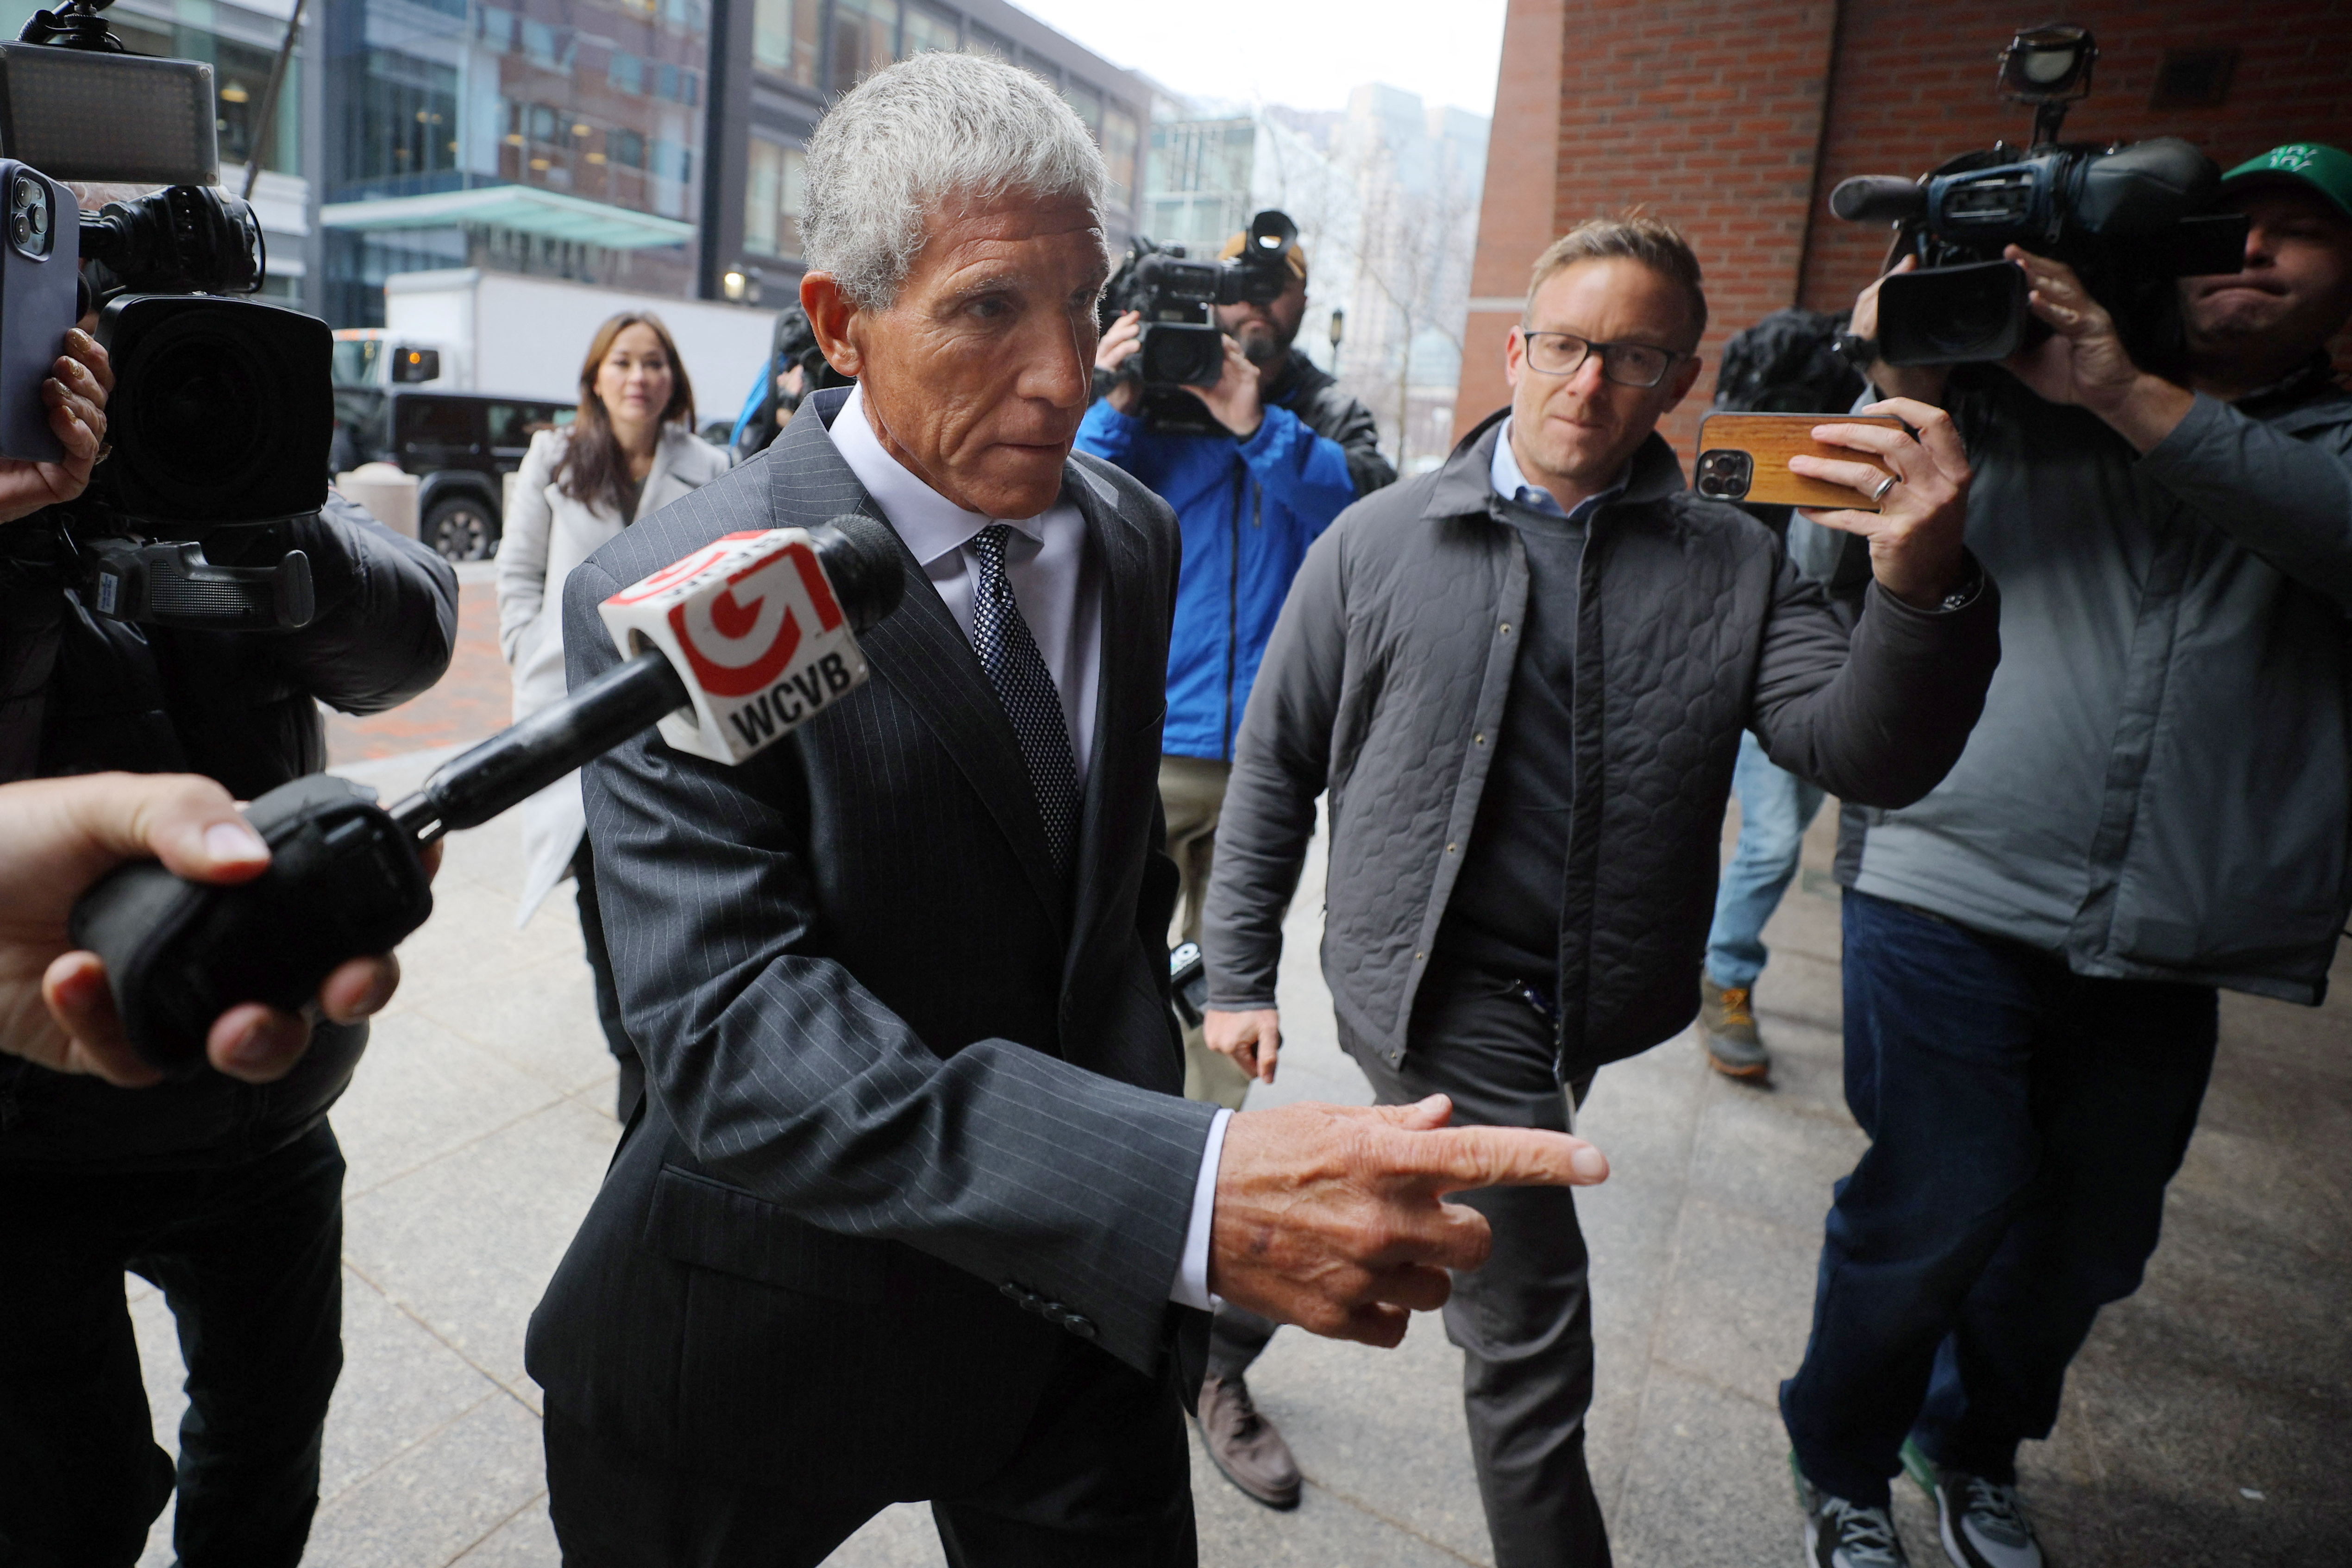 Varsity Blues mastermind Rick Singer arrives at the federal courthouse in Boston